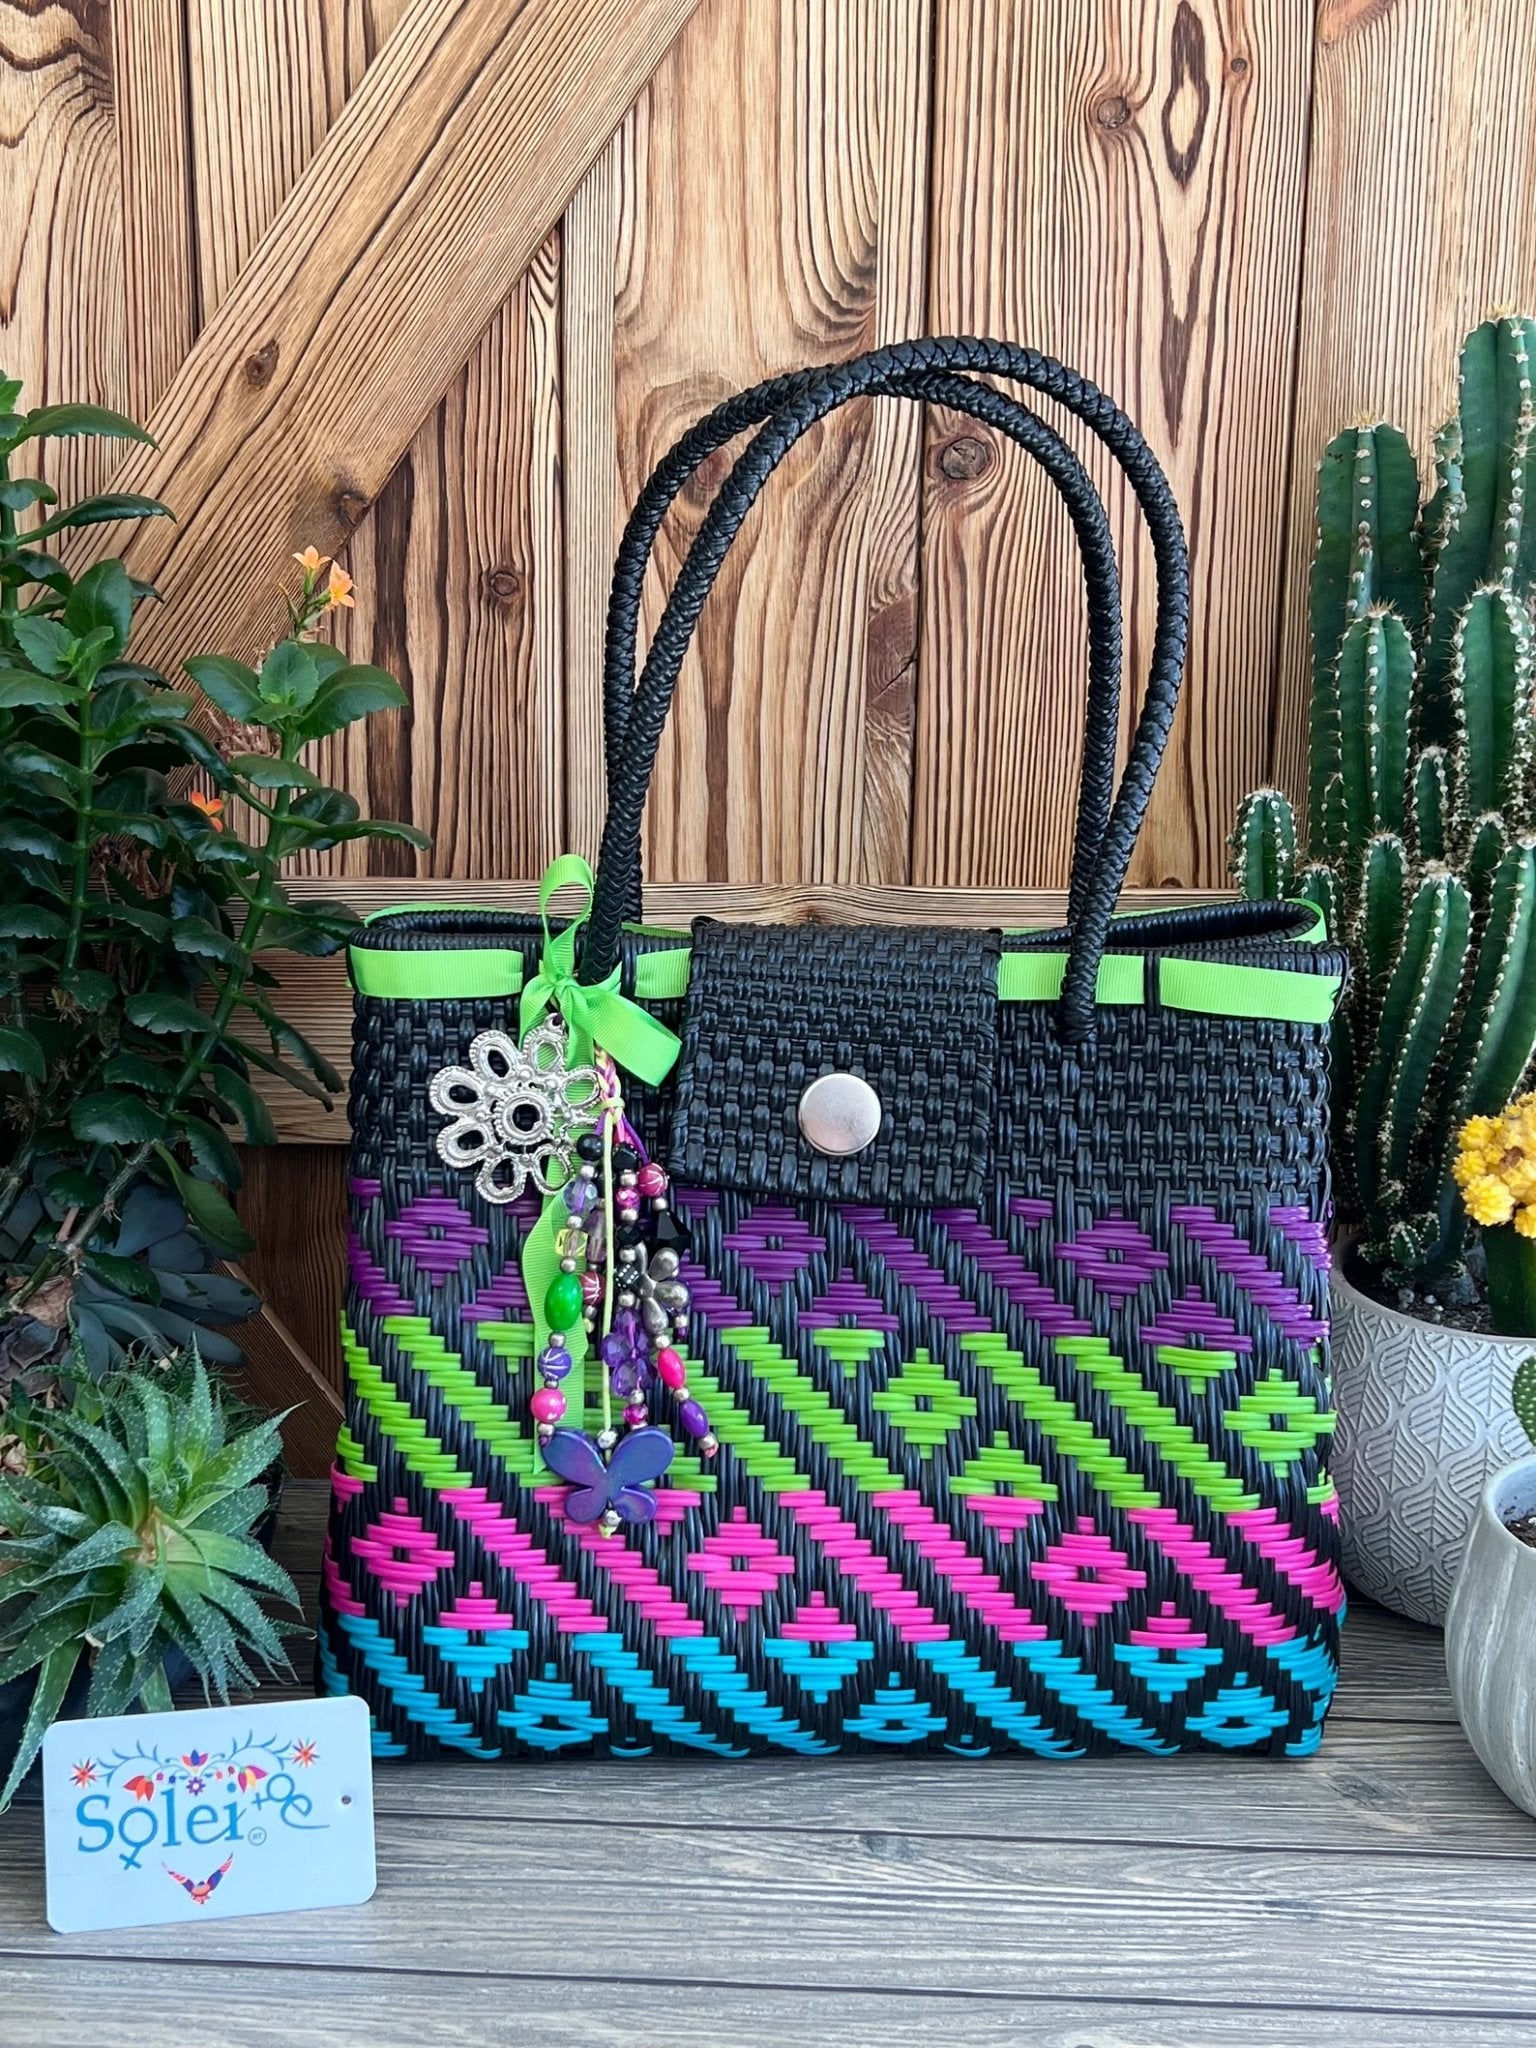 Artisanal Mexican Tote Bag with Charms. Huichol Bag - Solei Store